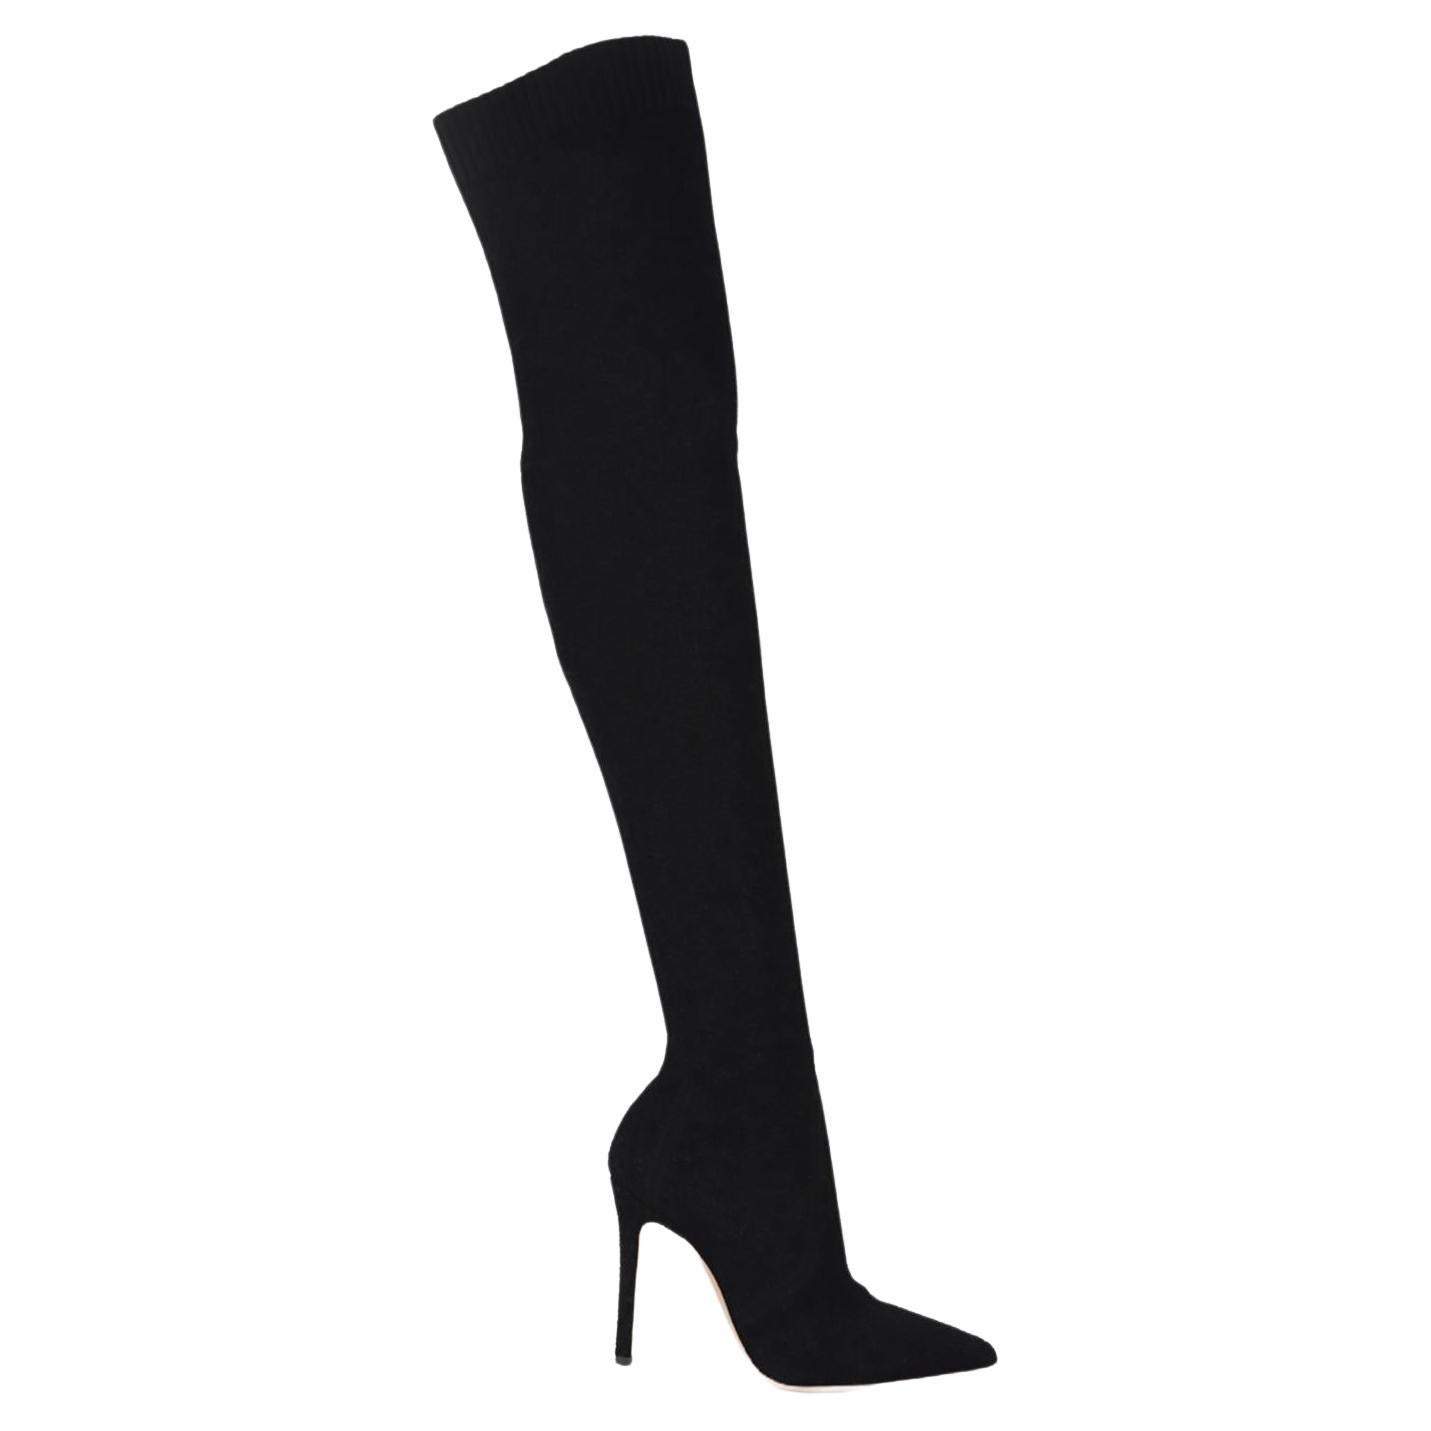 Gianvito Rossi Stretch Knit Over The Knee Boots Eu 38 Uk 5 Us 8